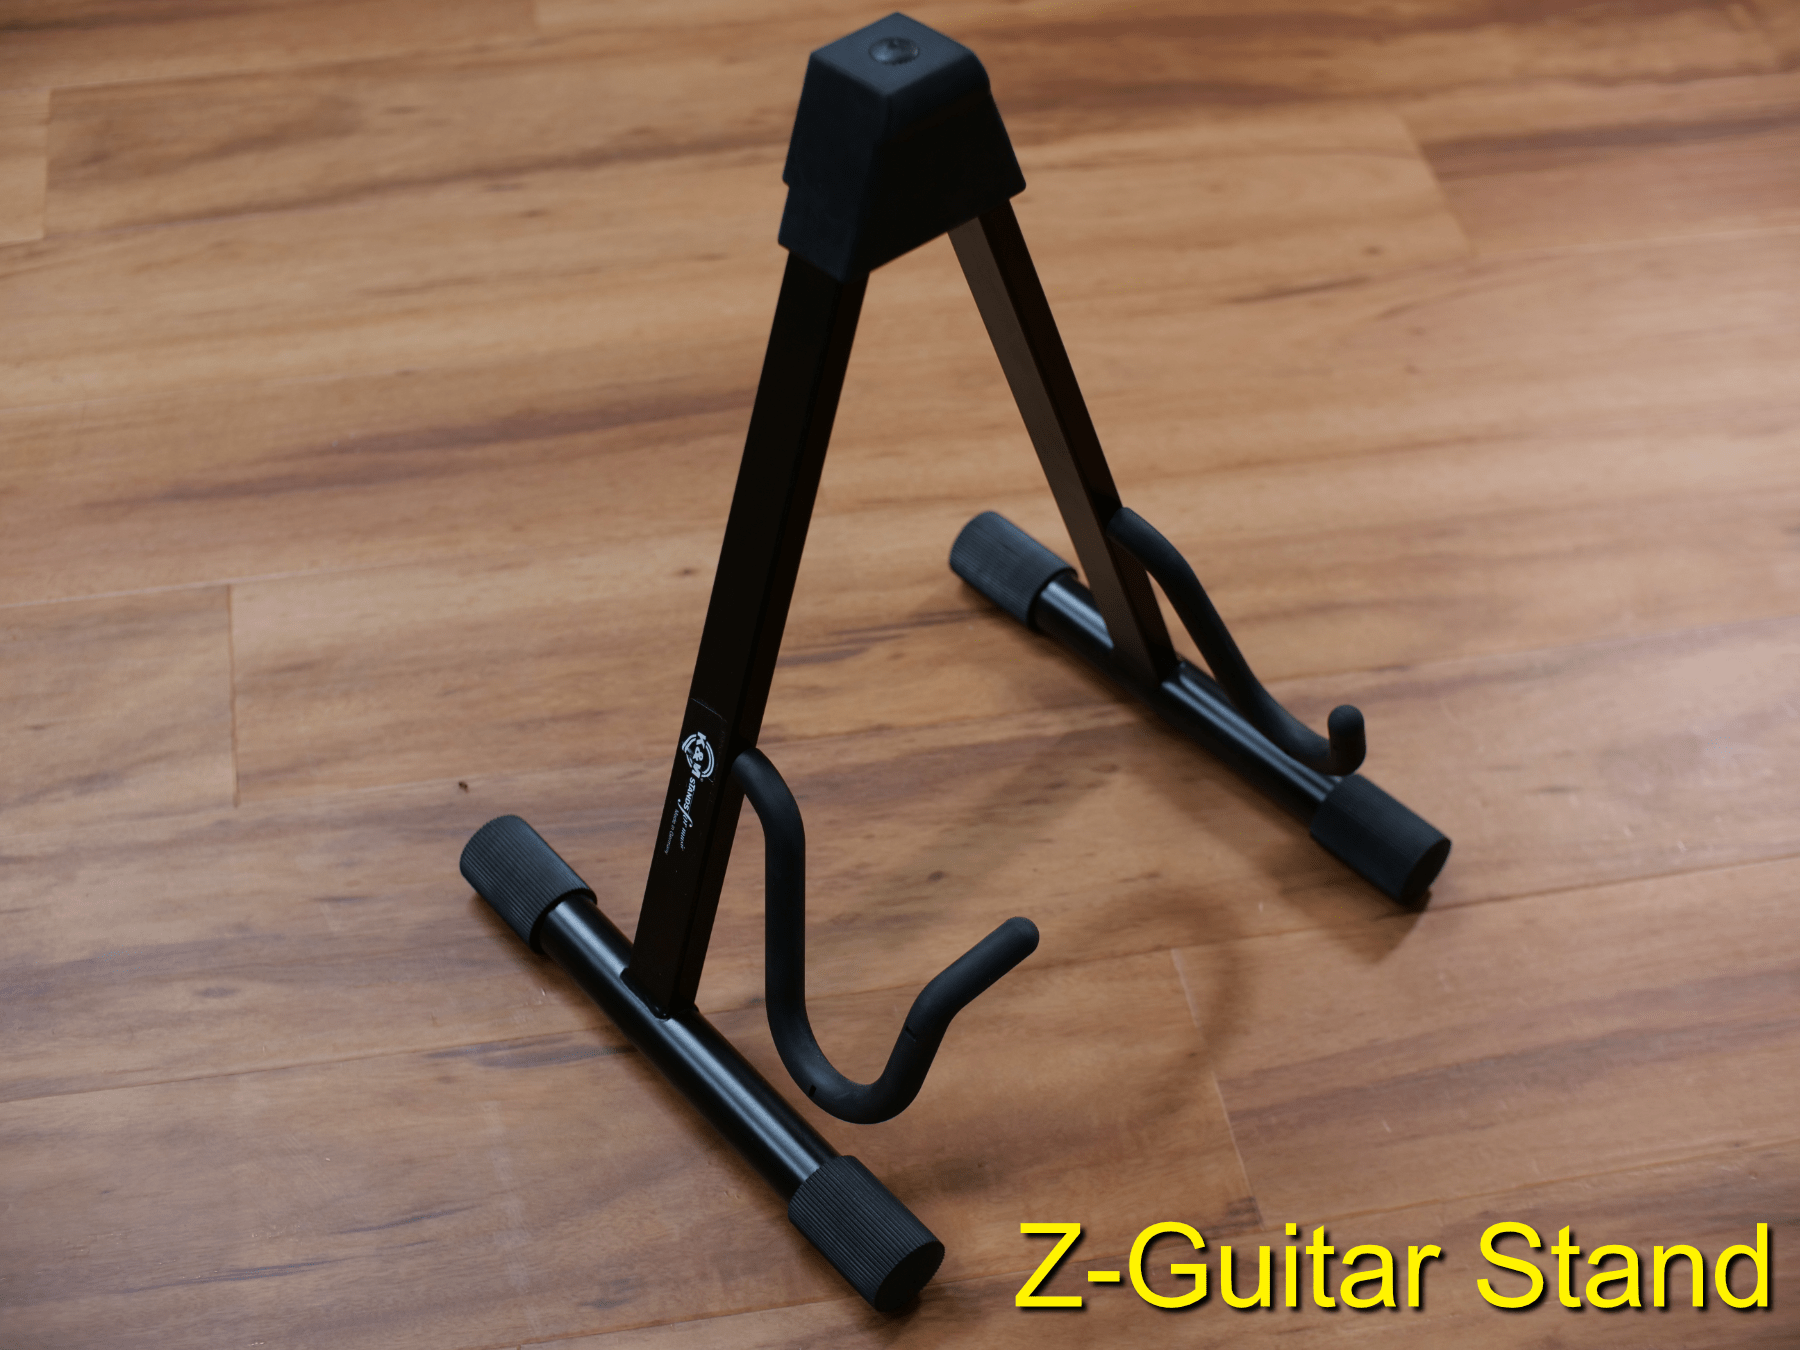 the Z-Guitar Stand